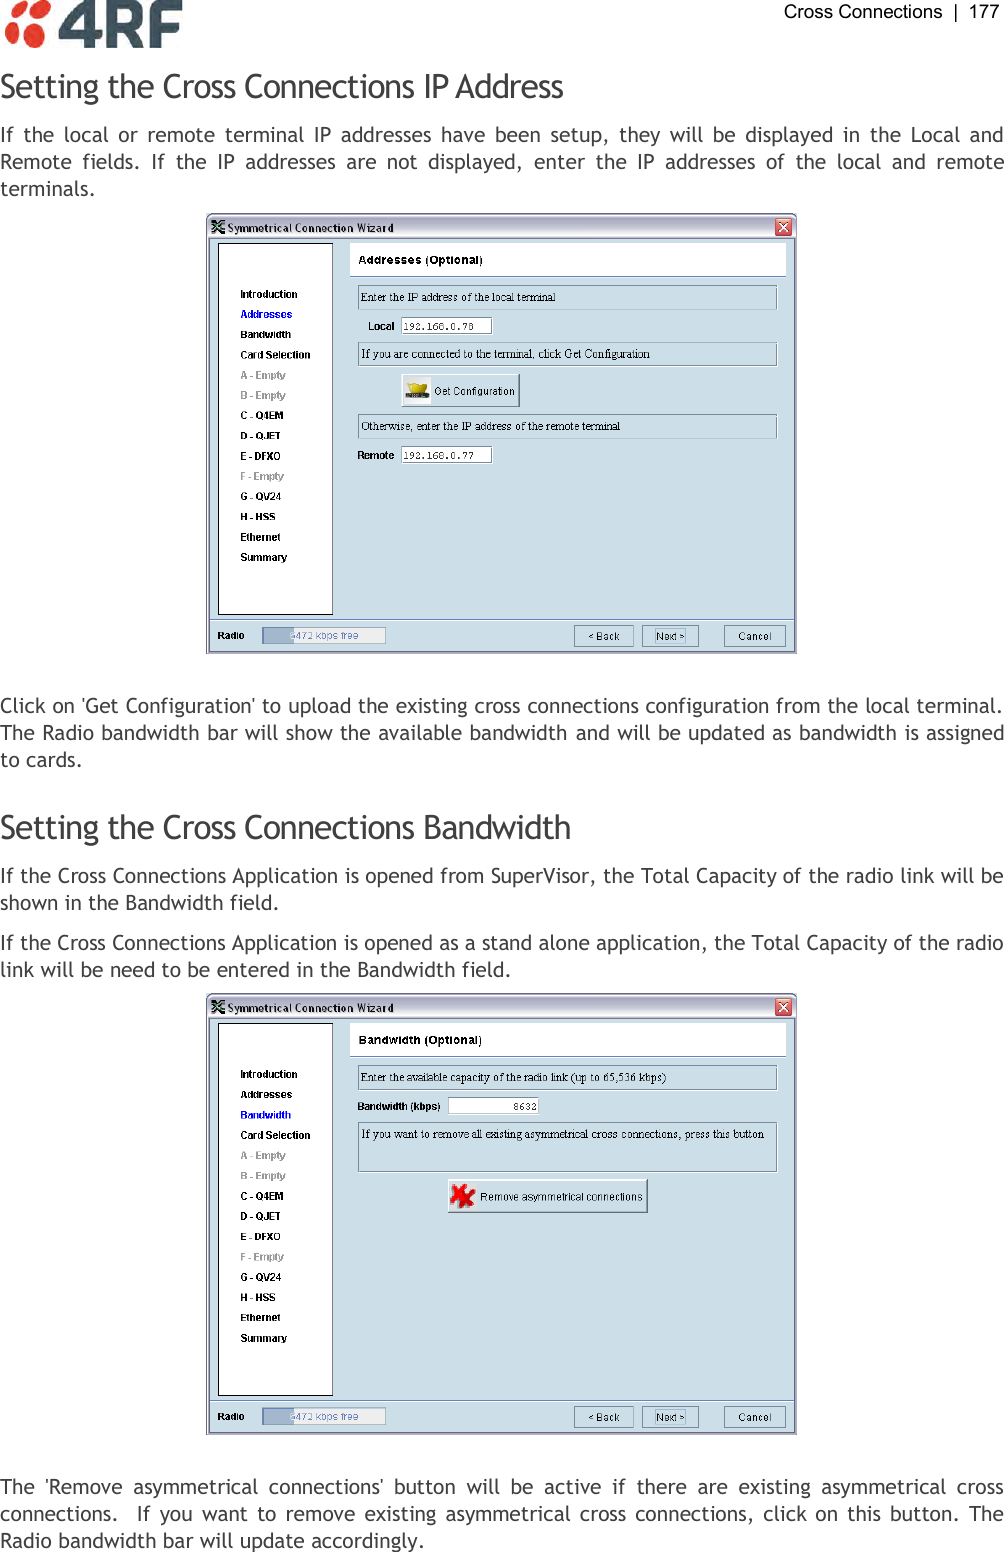  Cross Connections  |  177   Setting the Cross Connections IP Address If  the  local  or  remote  terminal  IP  addresses  have  been  setup,  they  will be  displayed in  the  Local and Remote  fields.  If  the  IP  addresses  are  not  displayed,  enter  the  IP  addresses  of  the  local  and  remote terminals.   Click on &apos;Get Configuration&apos; to upload the existing cross connections configuration from the local terminal. The Radio bandwidth bar will show the available bandwidth and will be updated as bandwidth is assigned to cards.  Setting the Cross Connections Bandwidth If the Cross Connections Application is opened from SuperVisor, the Total Capacity of the radio link will be shown in the Bandwidth field. If the Cross Connections Application is opened as a stand alone application, the Total Capacity of the radio link will be need to be entered in the Bandwidth field.   The  &apos;Remove  asymmetrical  connections&apos;  button  will  be  active  if  there  are  existing  asymmetrical  cross connections.   If you want to remove  existing asymmetrical cross connections, click on this button. The Radio bandwidth bar will update accordingly. 